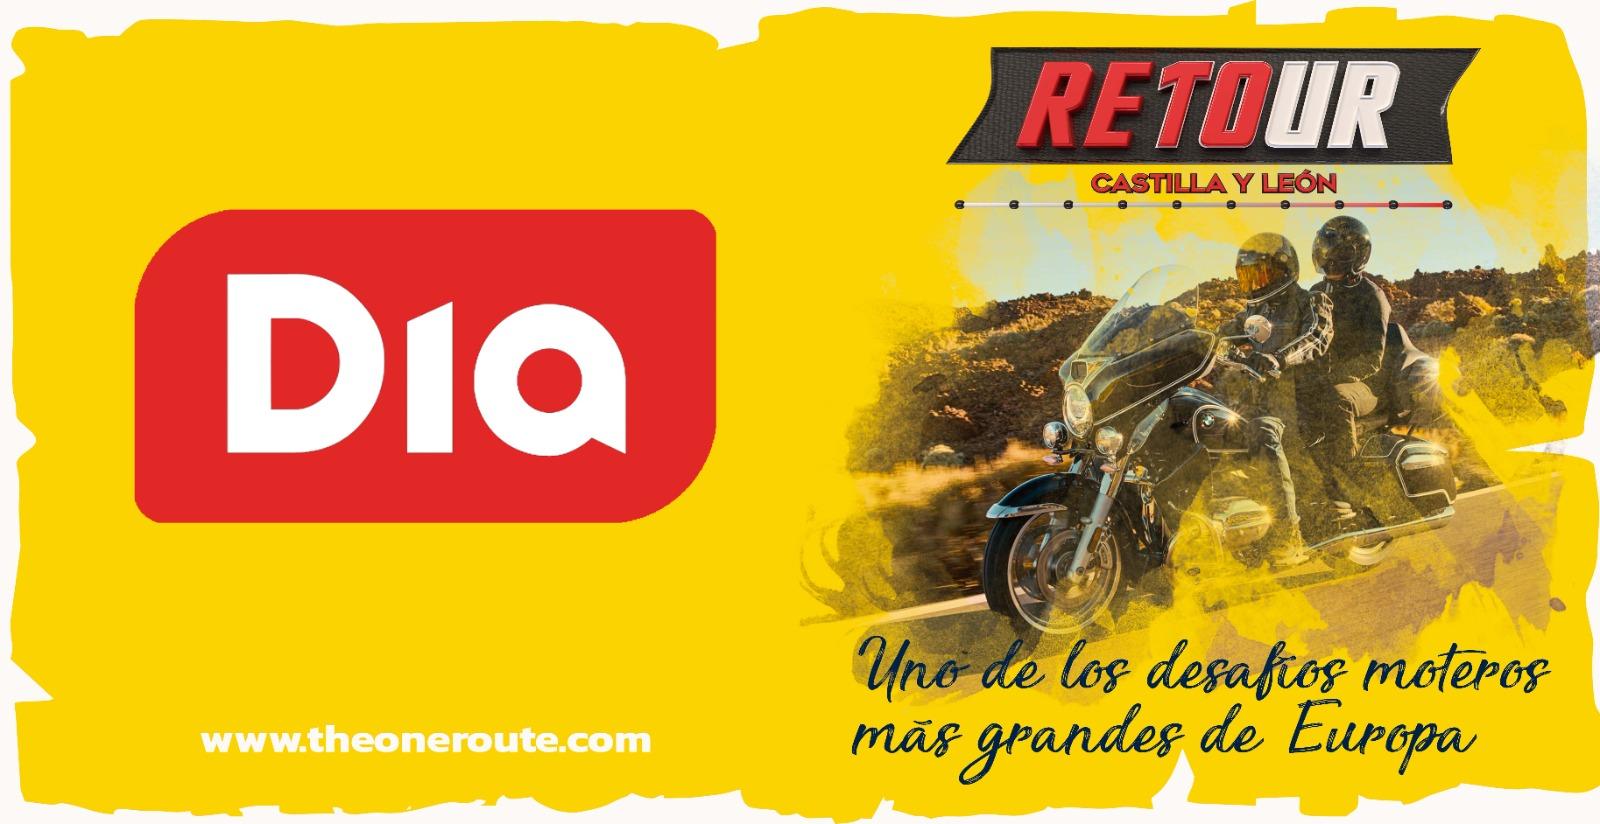 DIA joins Retour, the motorbike challenge across 200 towns in the Spanish region of Castile and Leon